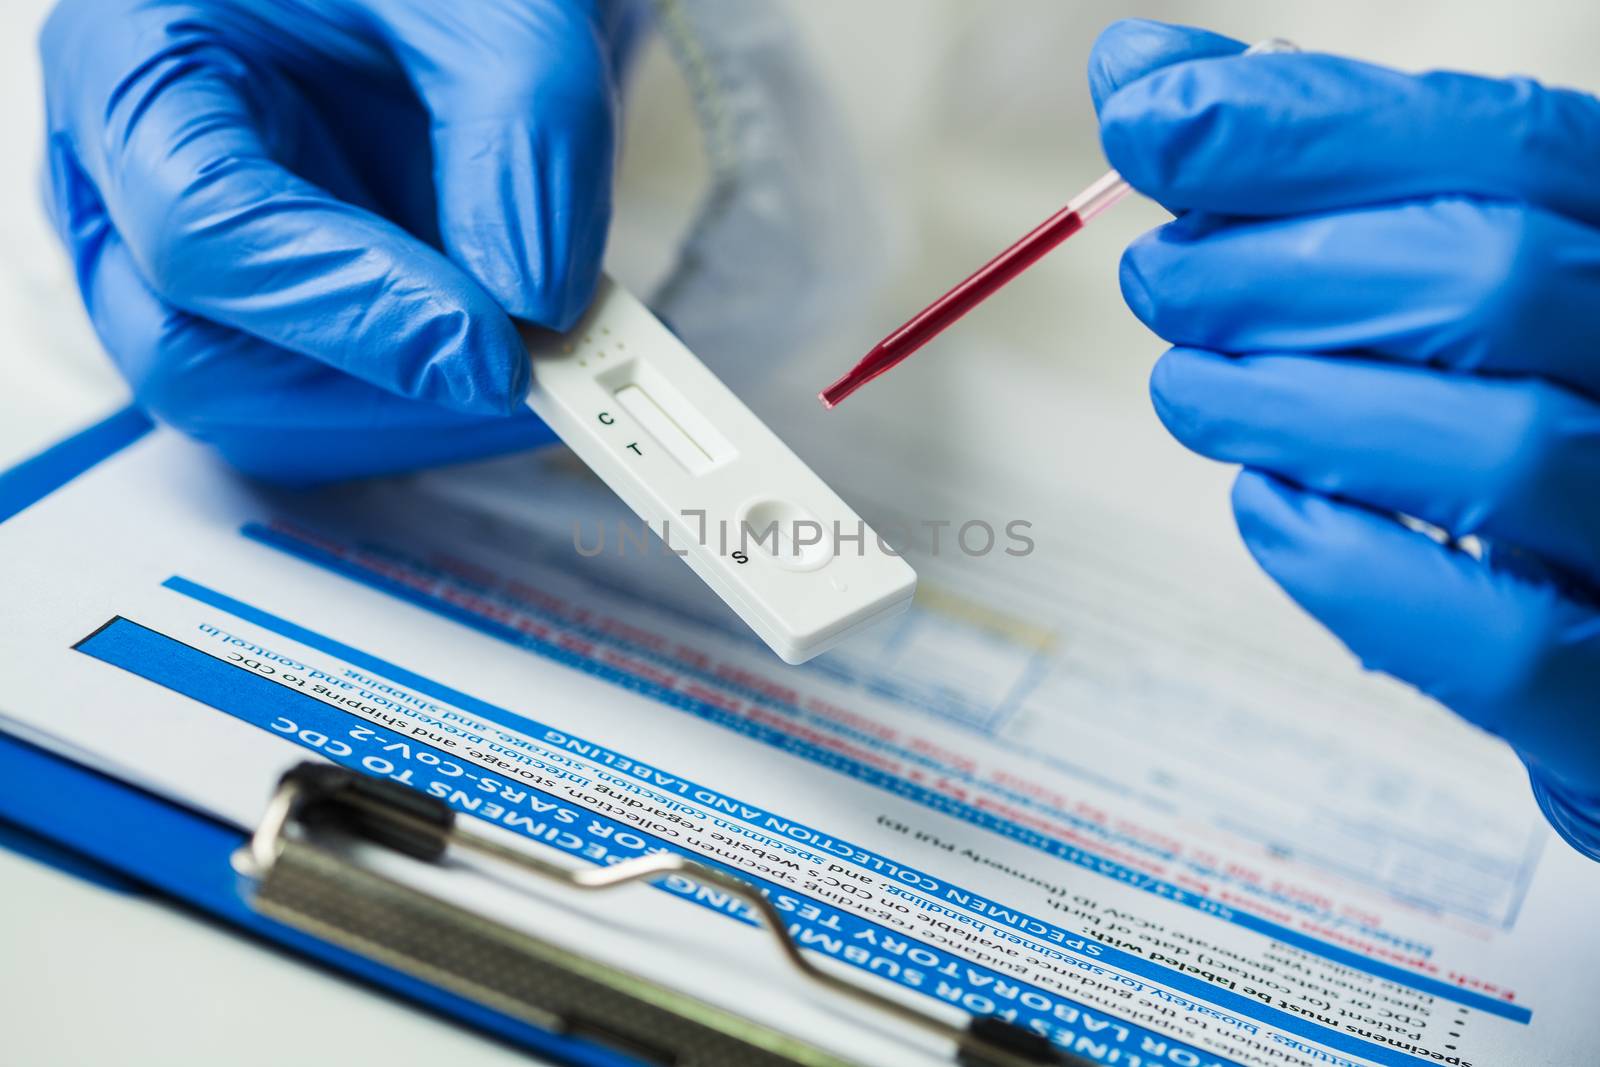 Lab scientist performing rapid diagnostic test RDT for antibodies to detect presence of viral protein antigens expressed by COVID-19 corona virus disease,CDC quick fast antibody point of care testing